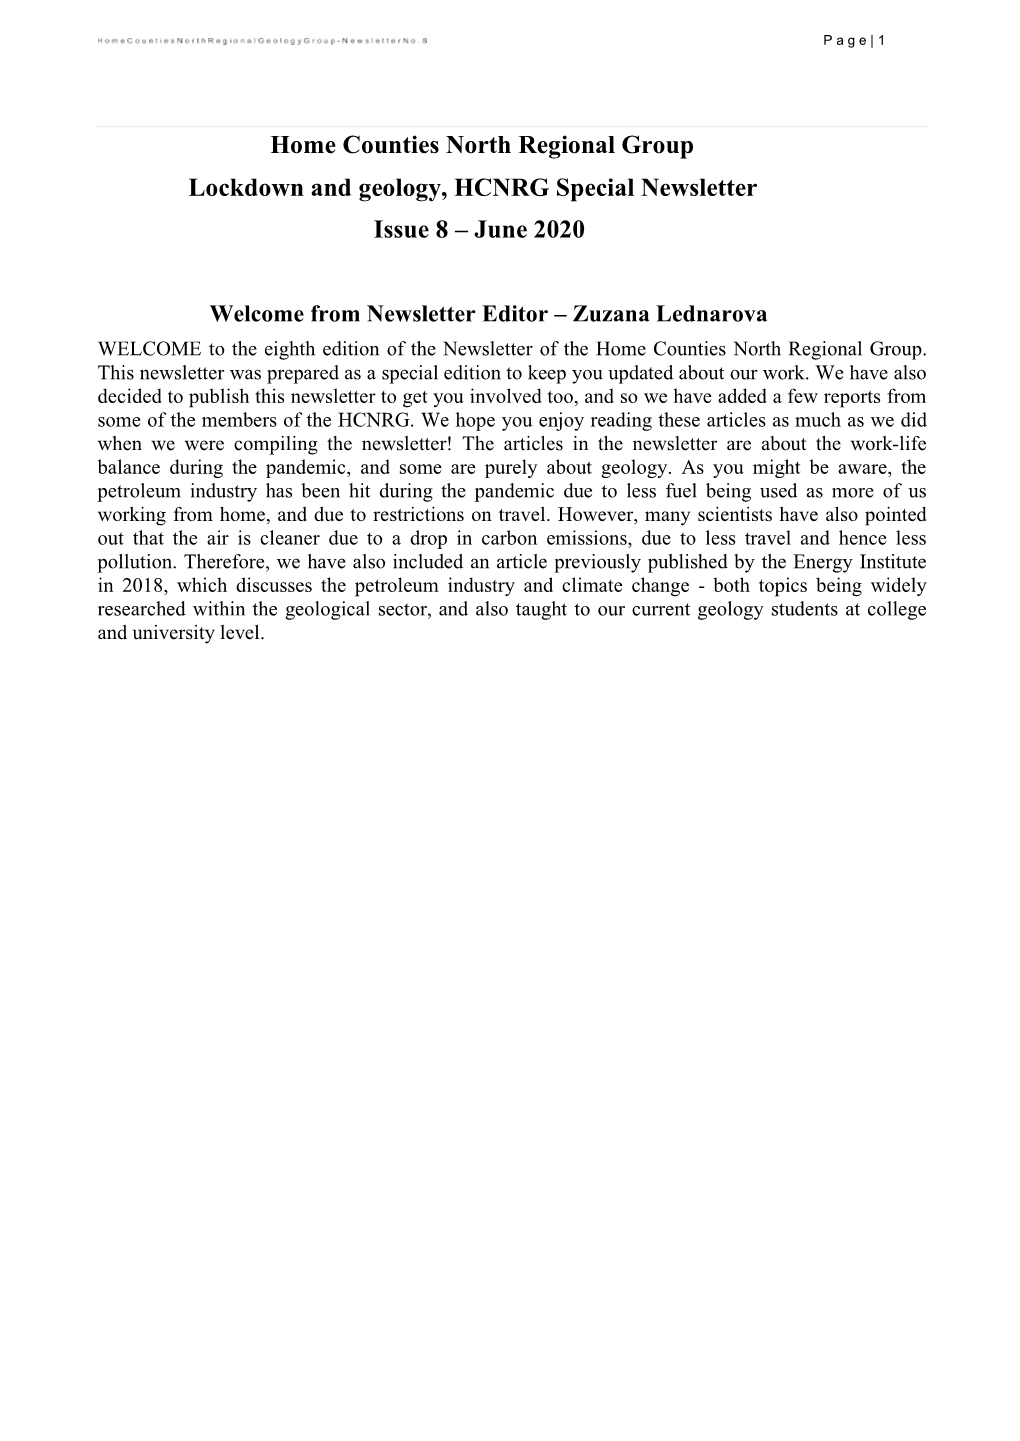 Home Counties North Regional Group Lockdown and Geology, HCNRG Special Newsletter Issue 8 – June 2020